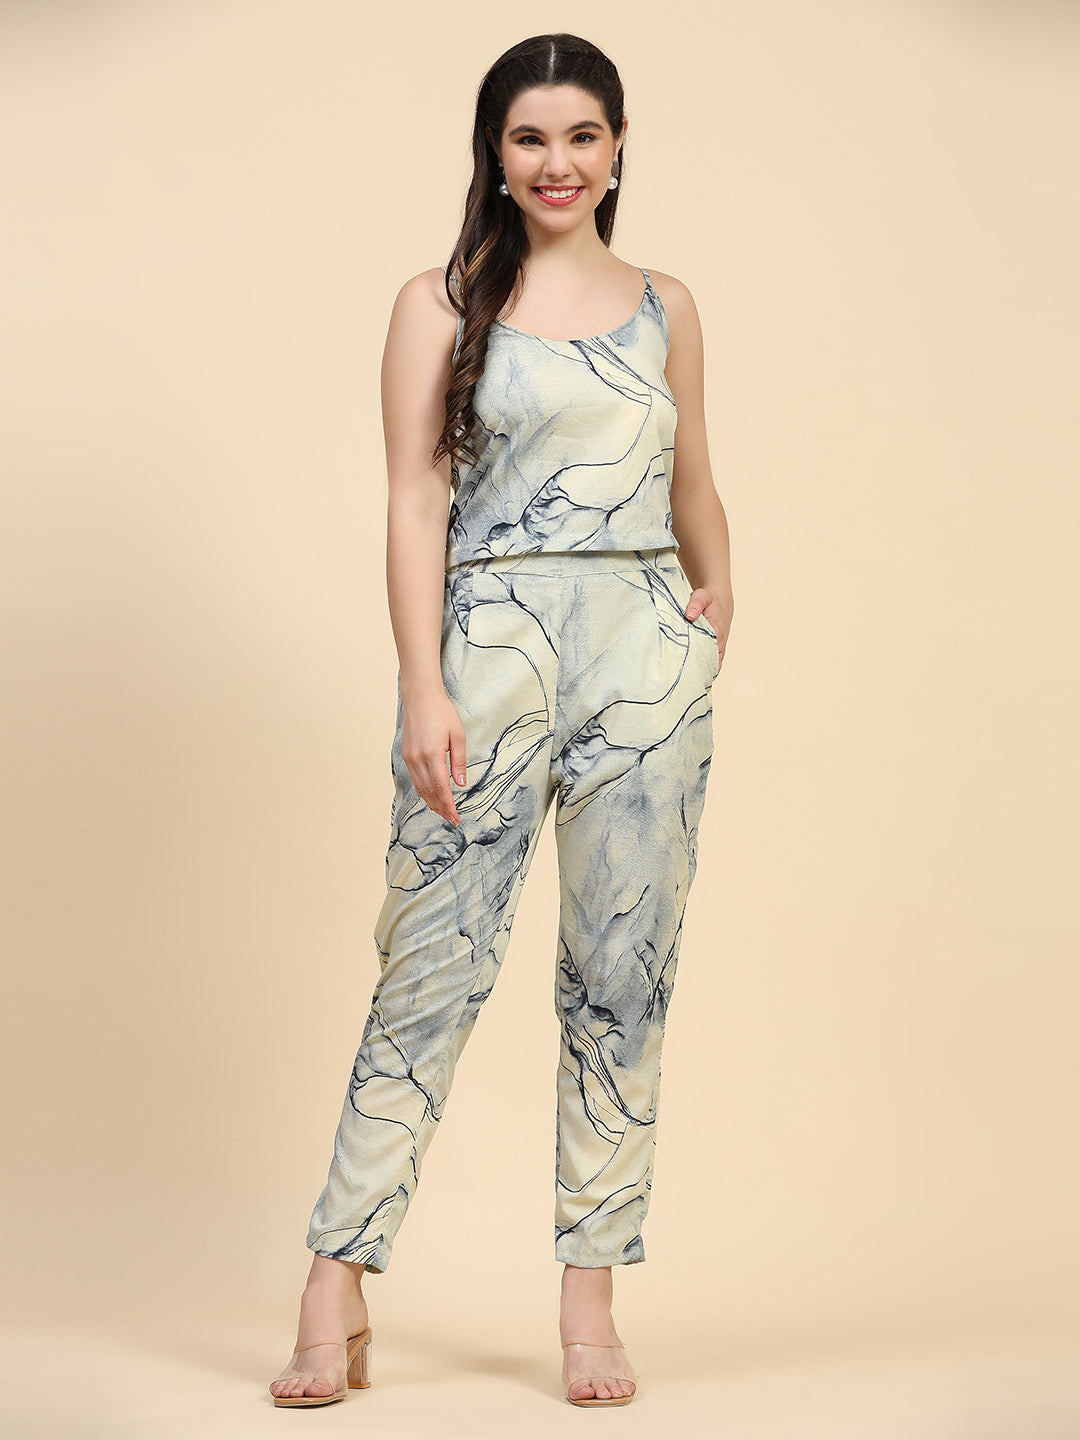 ANUSHIL Stylish Co-ord Set for Women - Printed Crop Top with Pants and Blazer, 3peice Co-ord Set for Casual Wear (Blue)